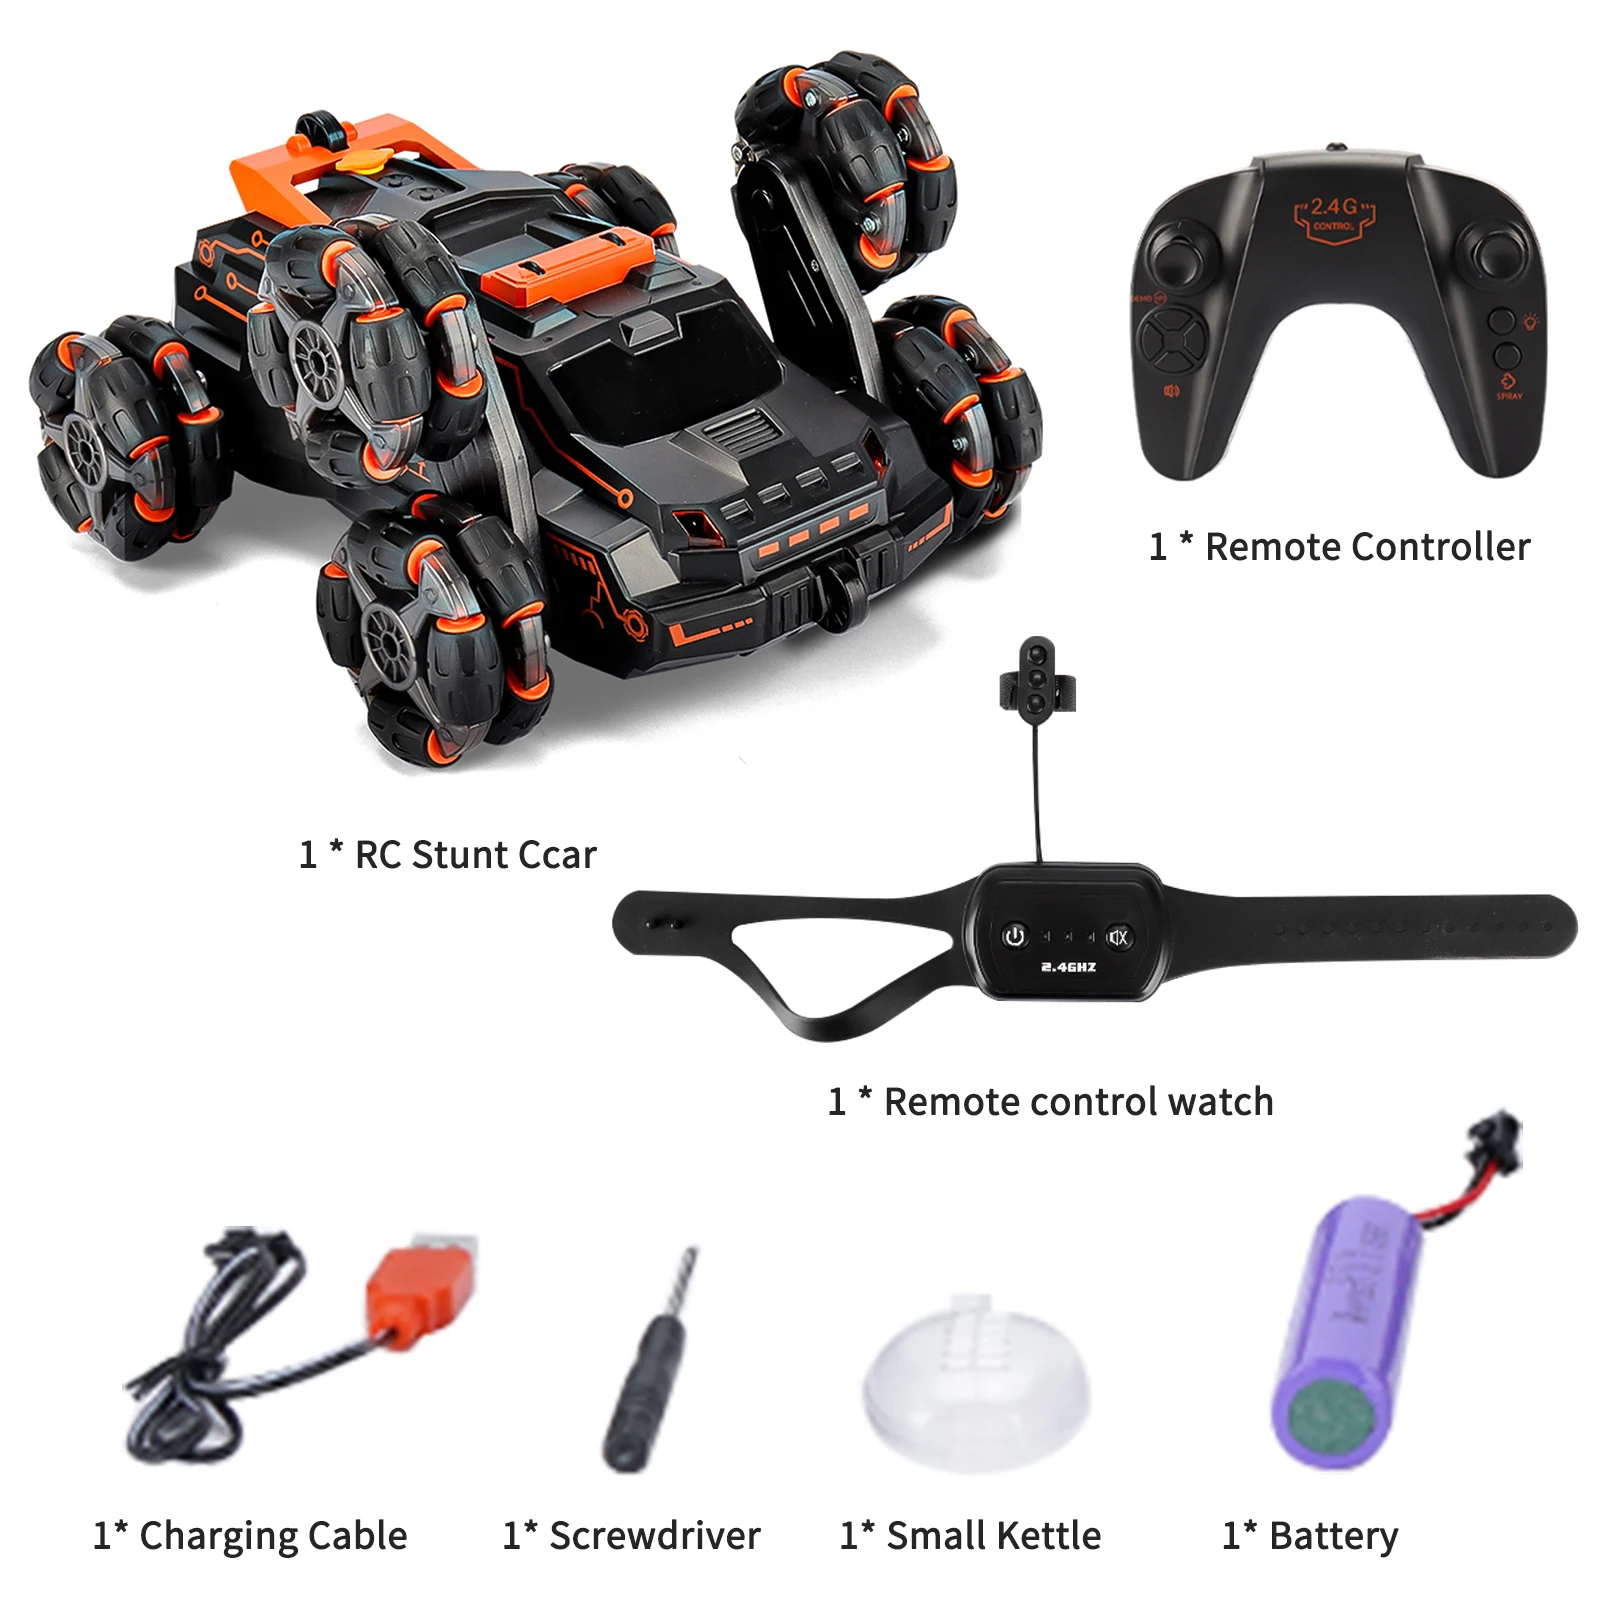 

RC Stunt Car 2.4GHz 4WD 2 Control Mode Double Sided 360° Rotating Vehicles with Spray Music Light Electronic Toy for Kids Boy